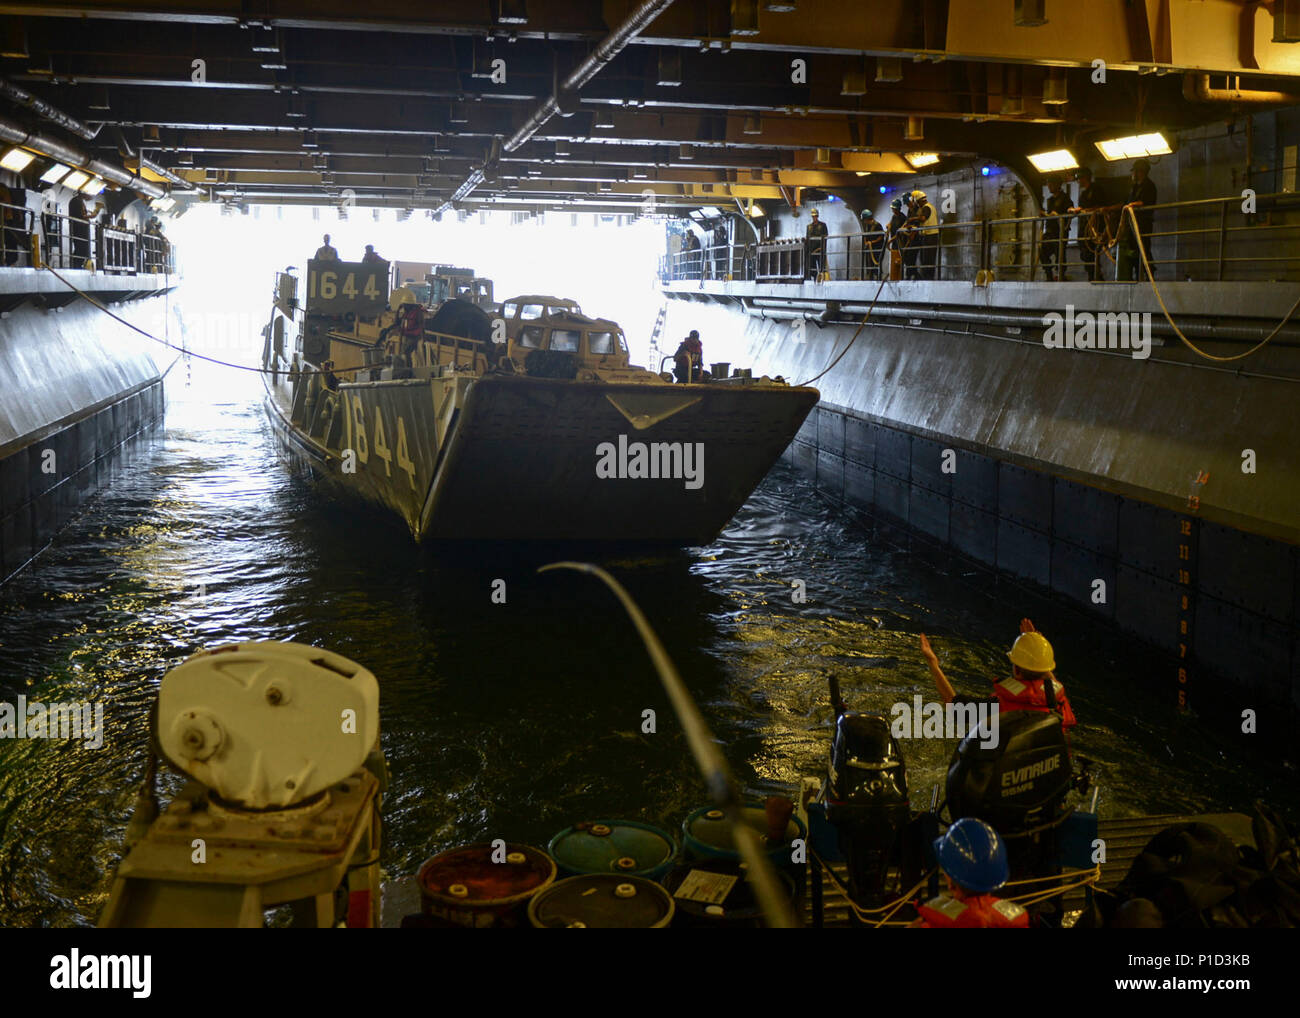 161013-N-RL456-1067 CARRIBEAN SEA (Oct. 13, 2016) Landing craft utility 1644, assigned to Assault Craft Unit 2 enters the well deck of the amphibious assault ship USS Iwo Jima (LHD 7) during well deck operations. Iwo Jima and the 24th Marine Expeditionary Unit are underway to provide disaster relief and humanitarian aid to Haiti following Hurricane Matthew. (U.S. Navy photo by Petty Officer 2nd Class Hunter S. Harwell/Released) Stock Photo